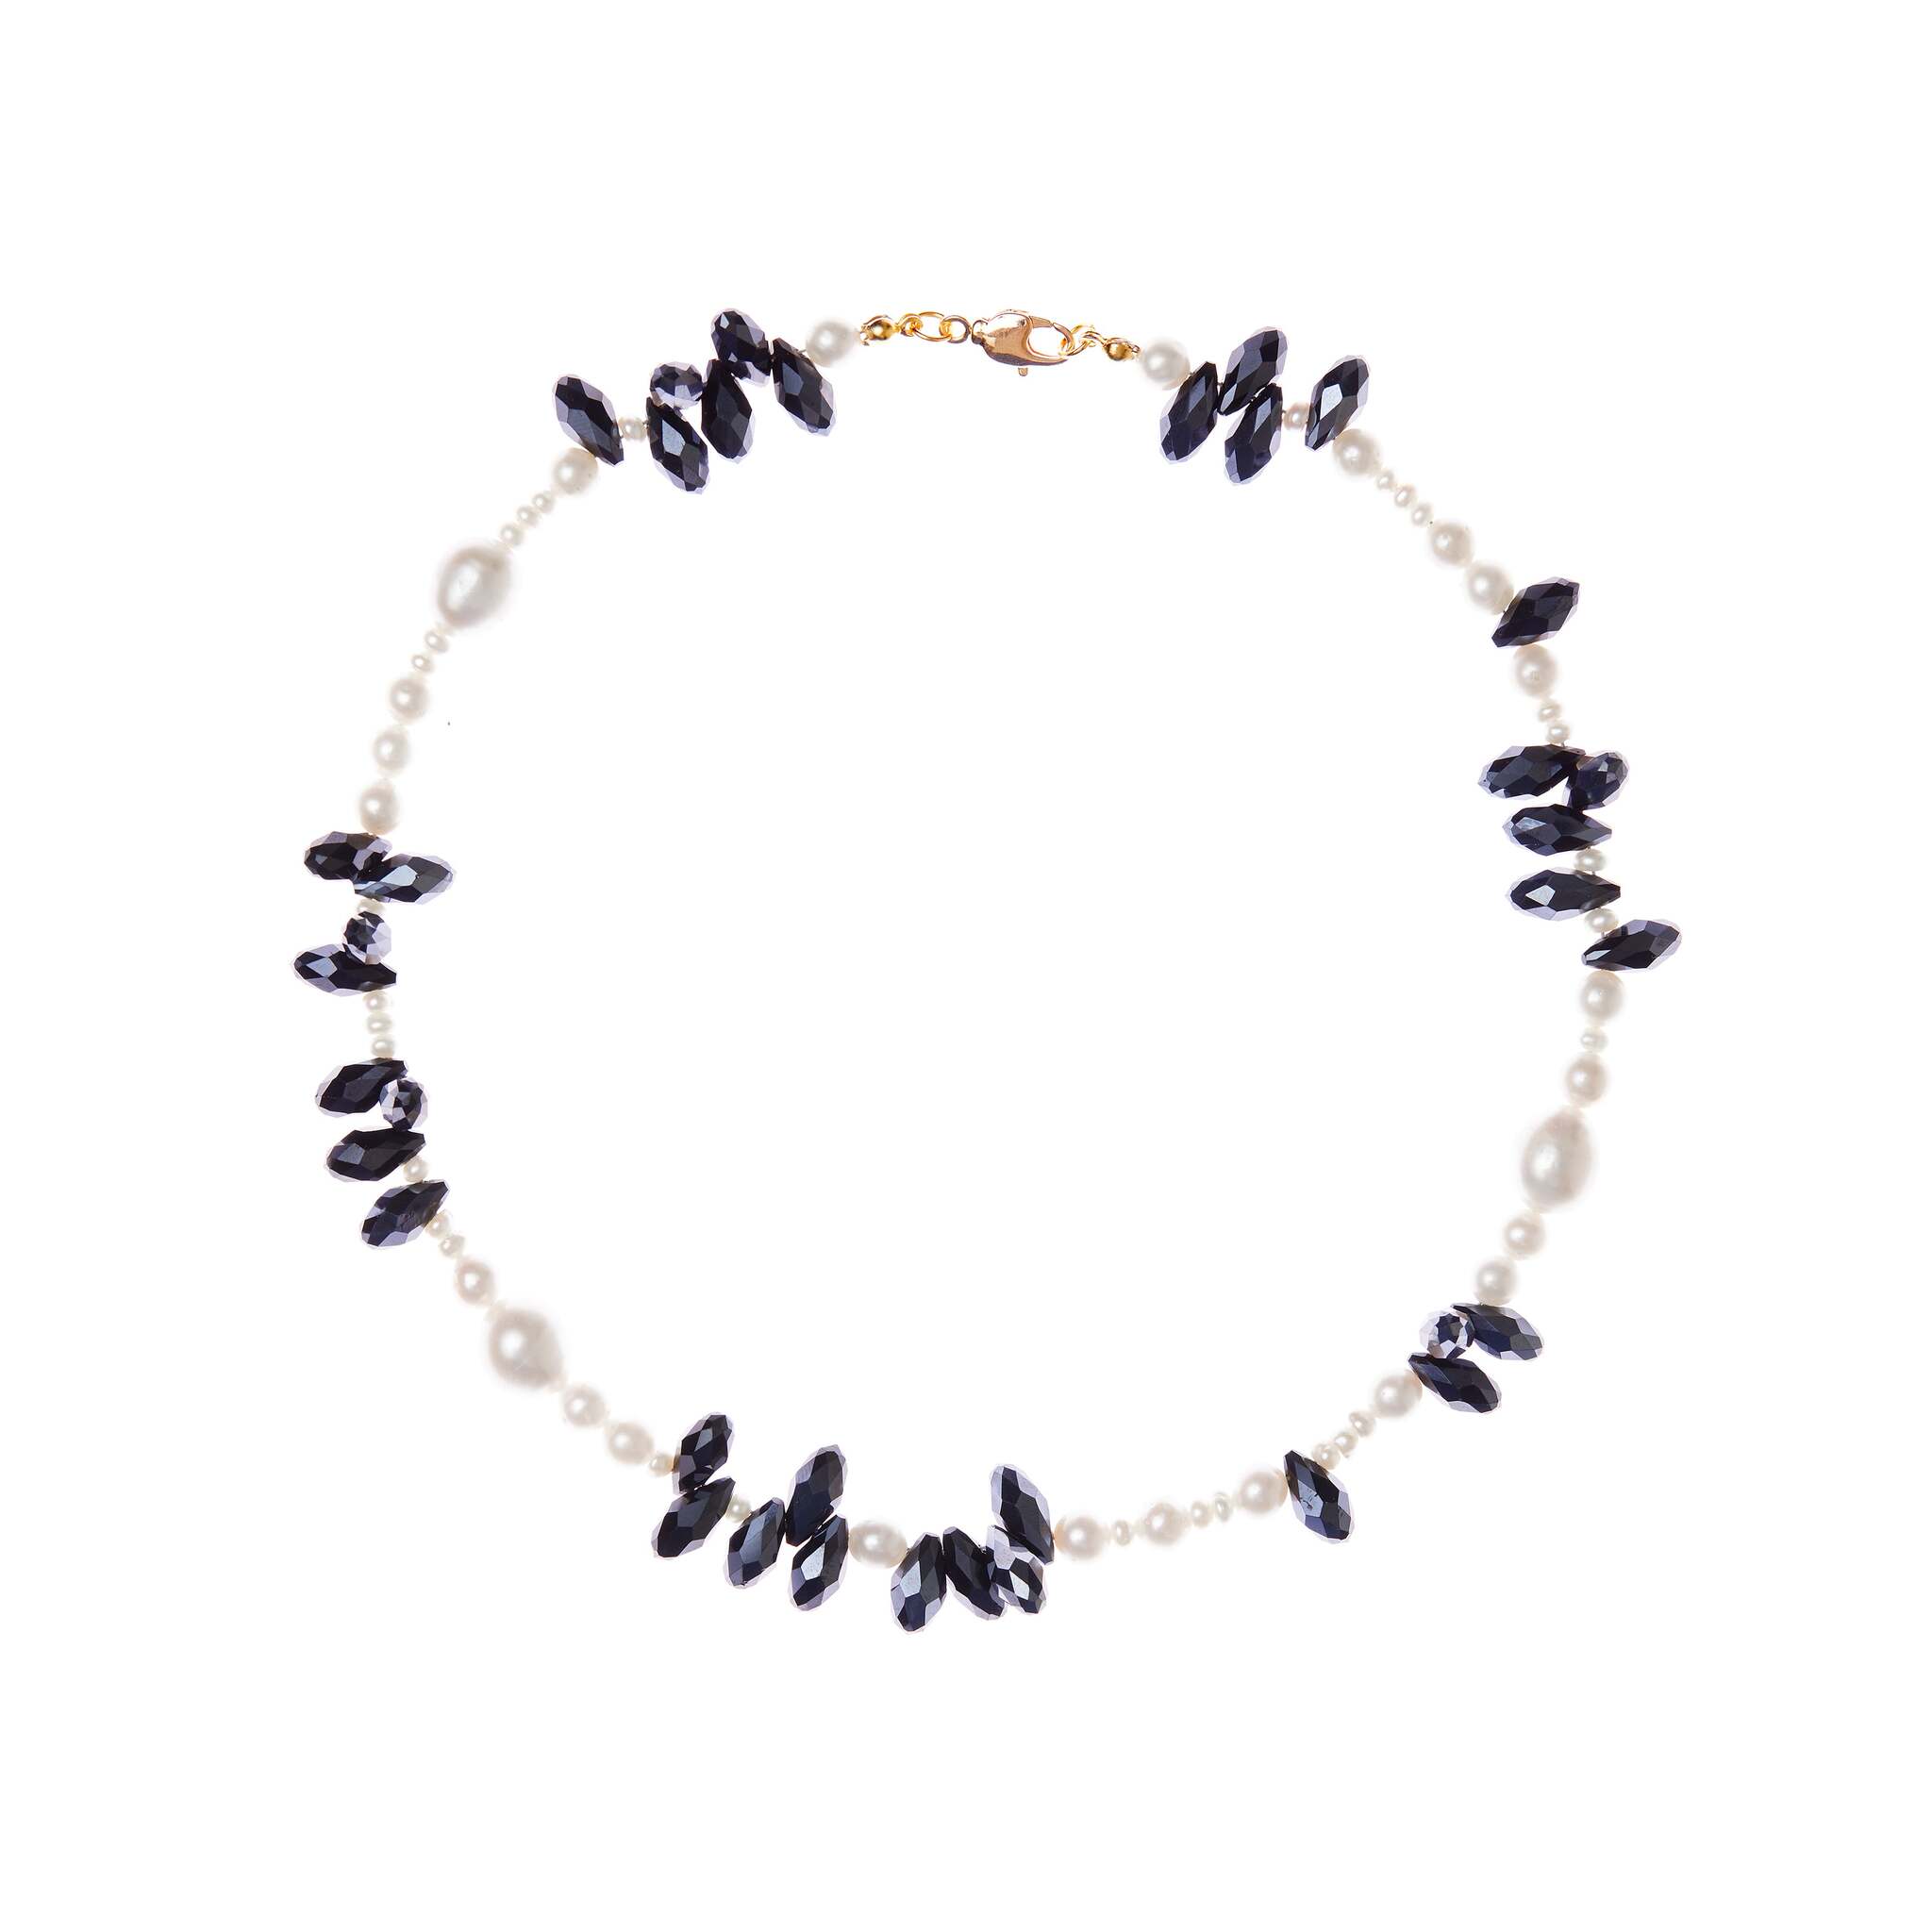 HOLLY JUNE Колье Black And White Crystal Pearl Necklace crystal haze колье serena necklace – black